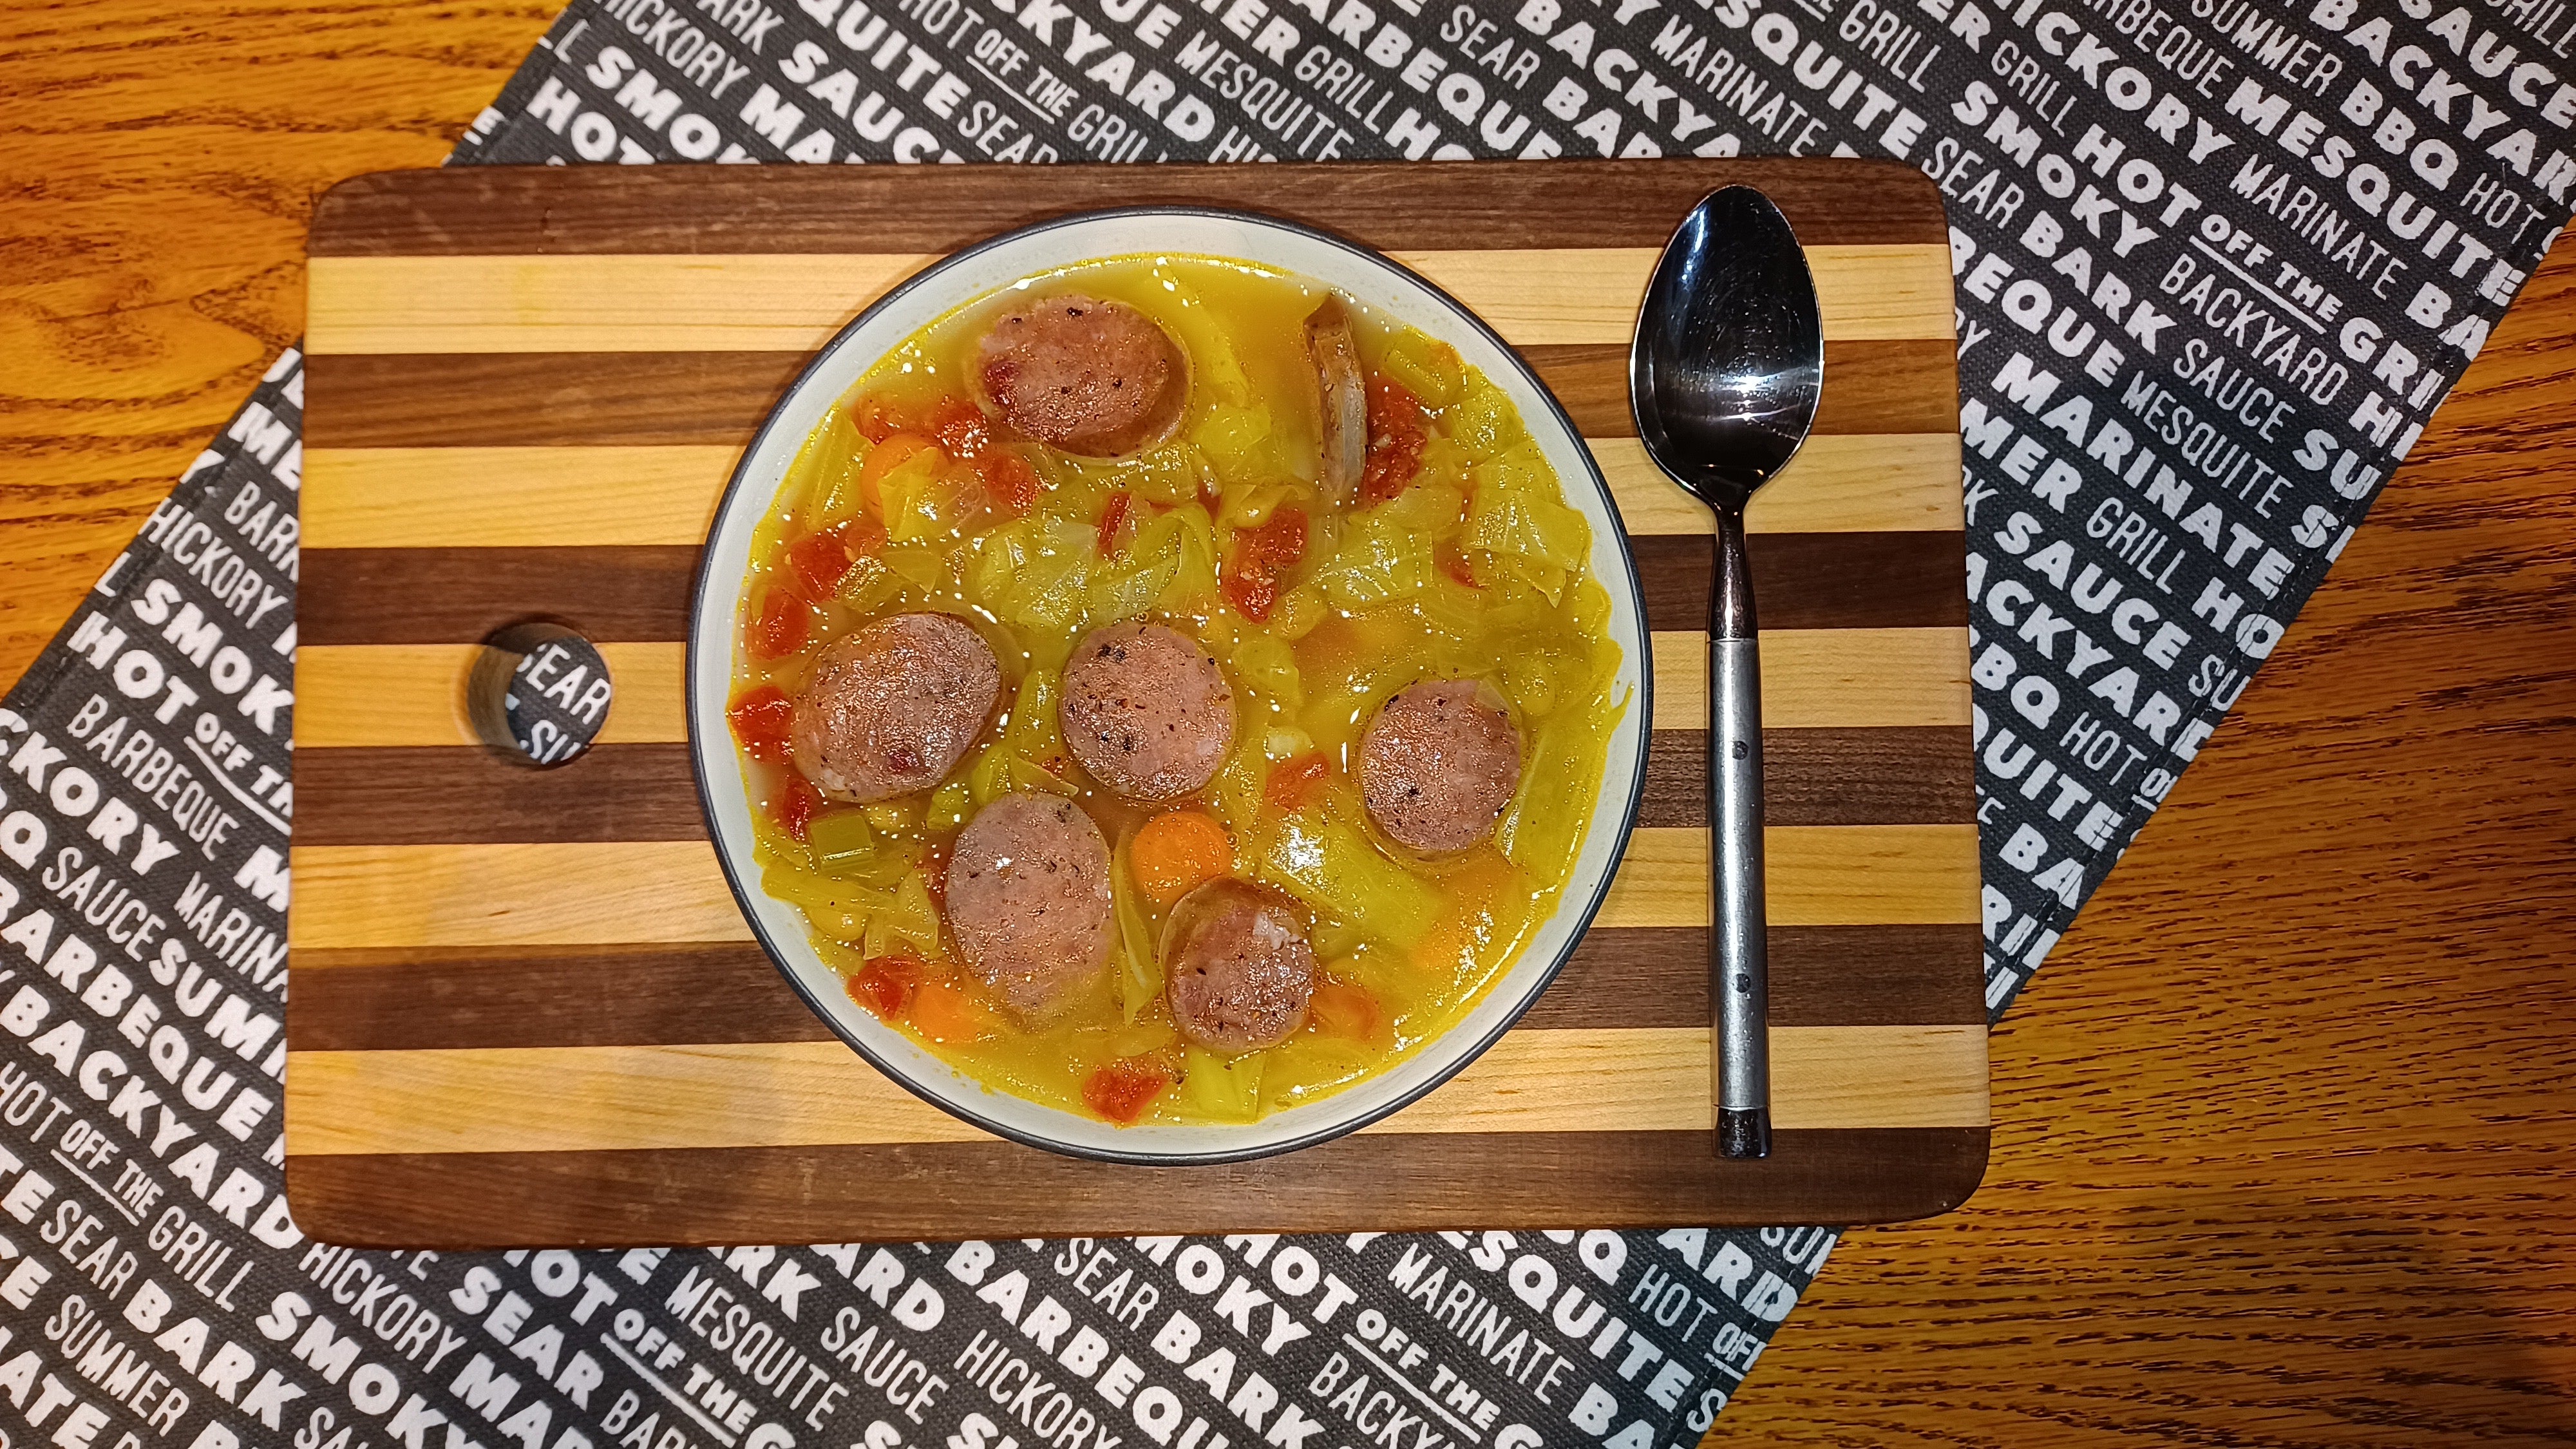 Kielbasa recipe for making sausage soup from the Barbecue At Home Recipe collection